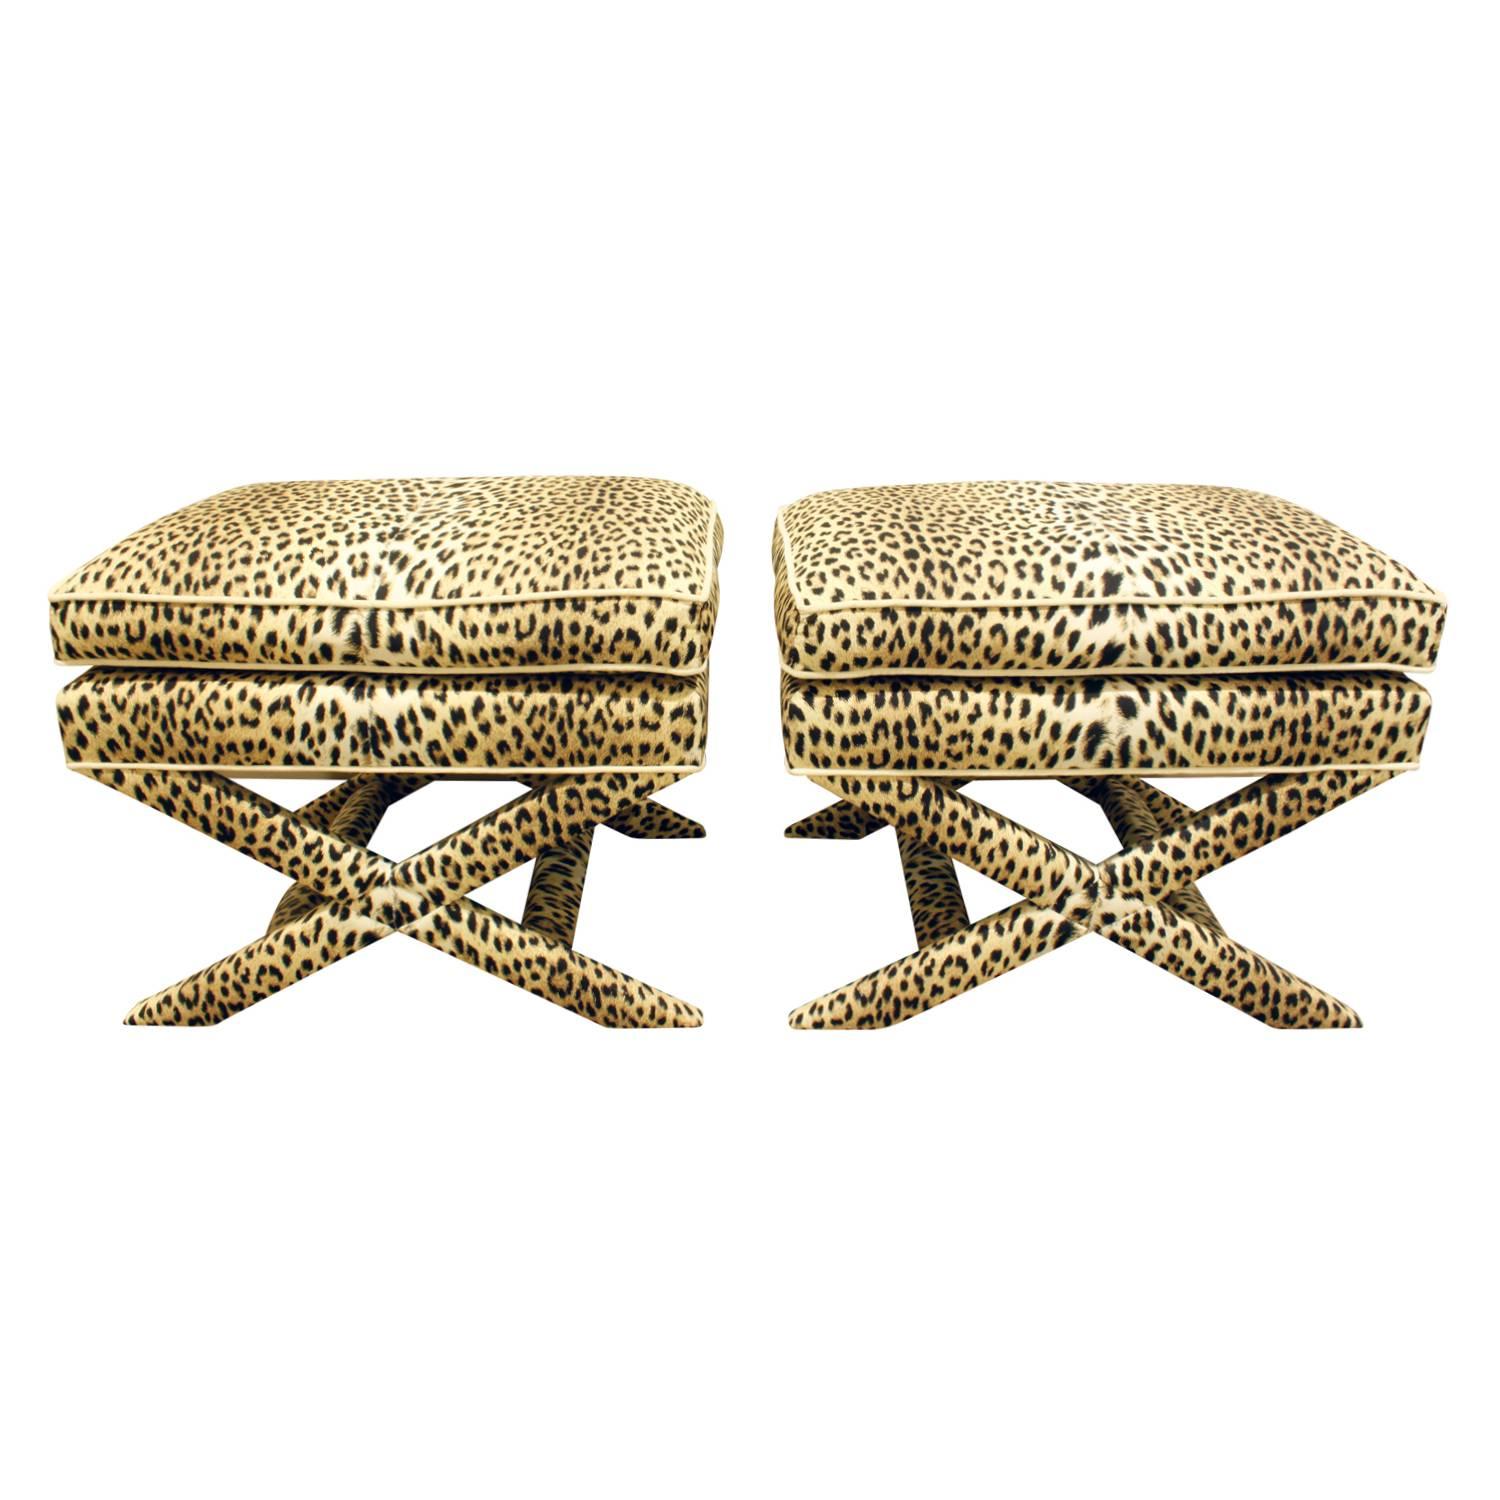 Pair of X-Benches in Leopard Print Fabric, 1970s